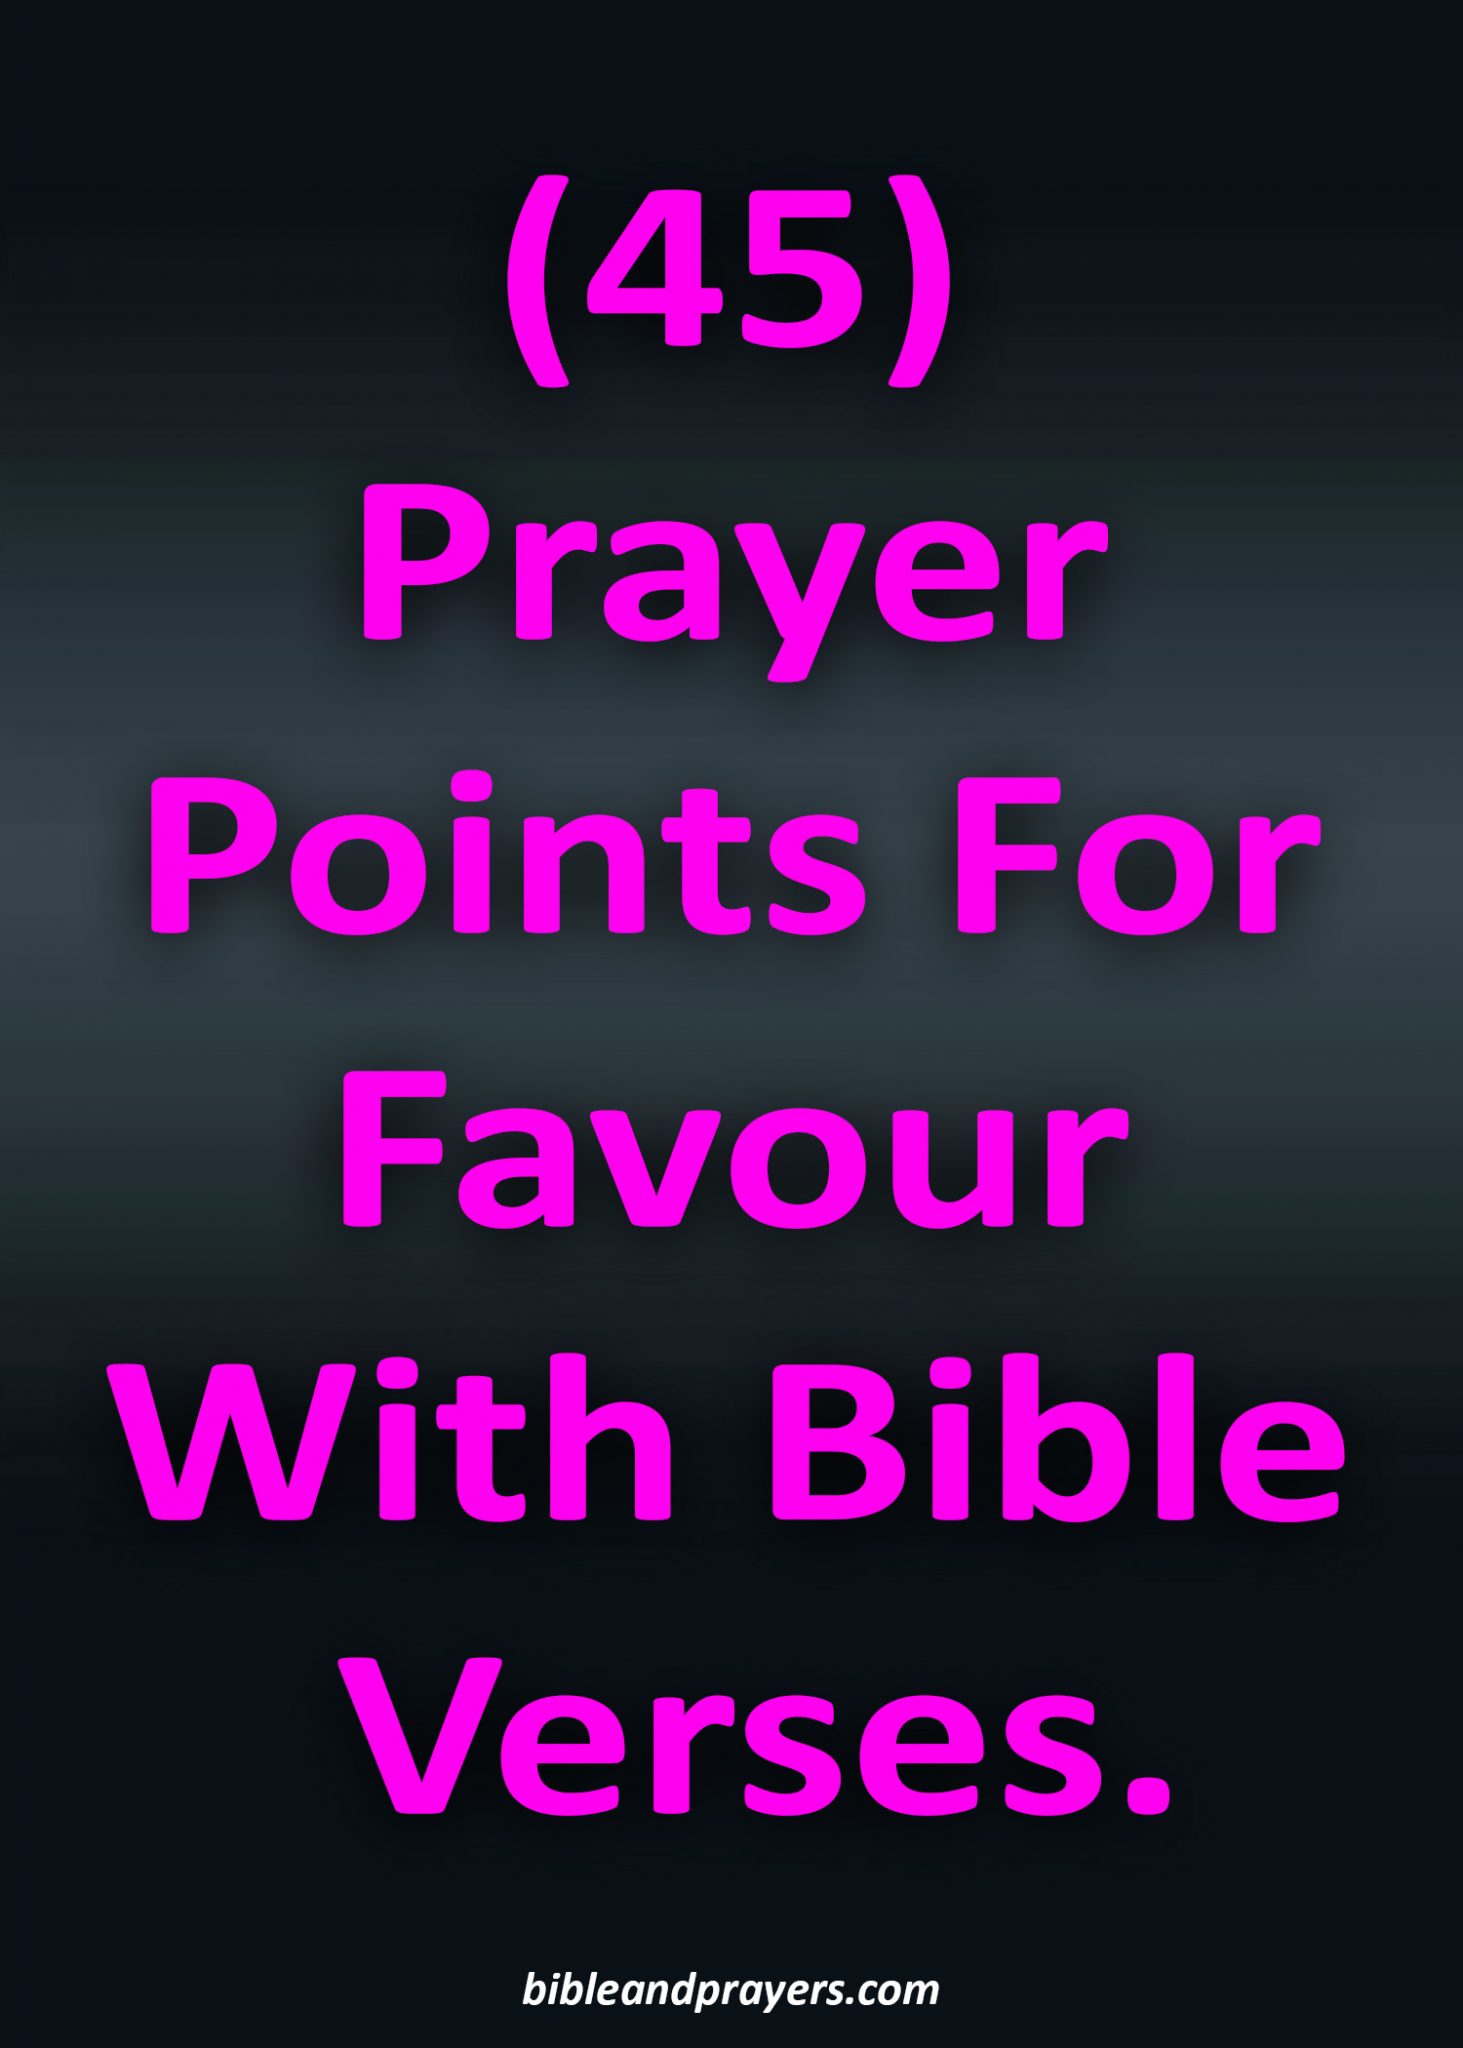 45 Prayer Points For Favour With Bible Verses -Bibleandprayers.com